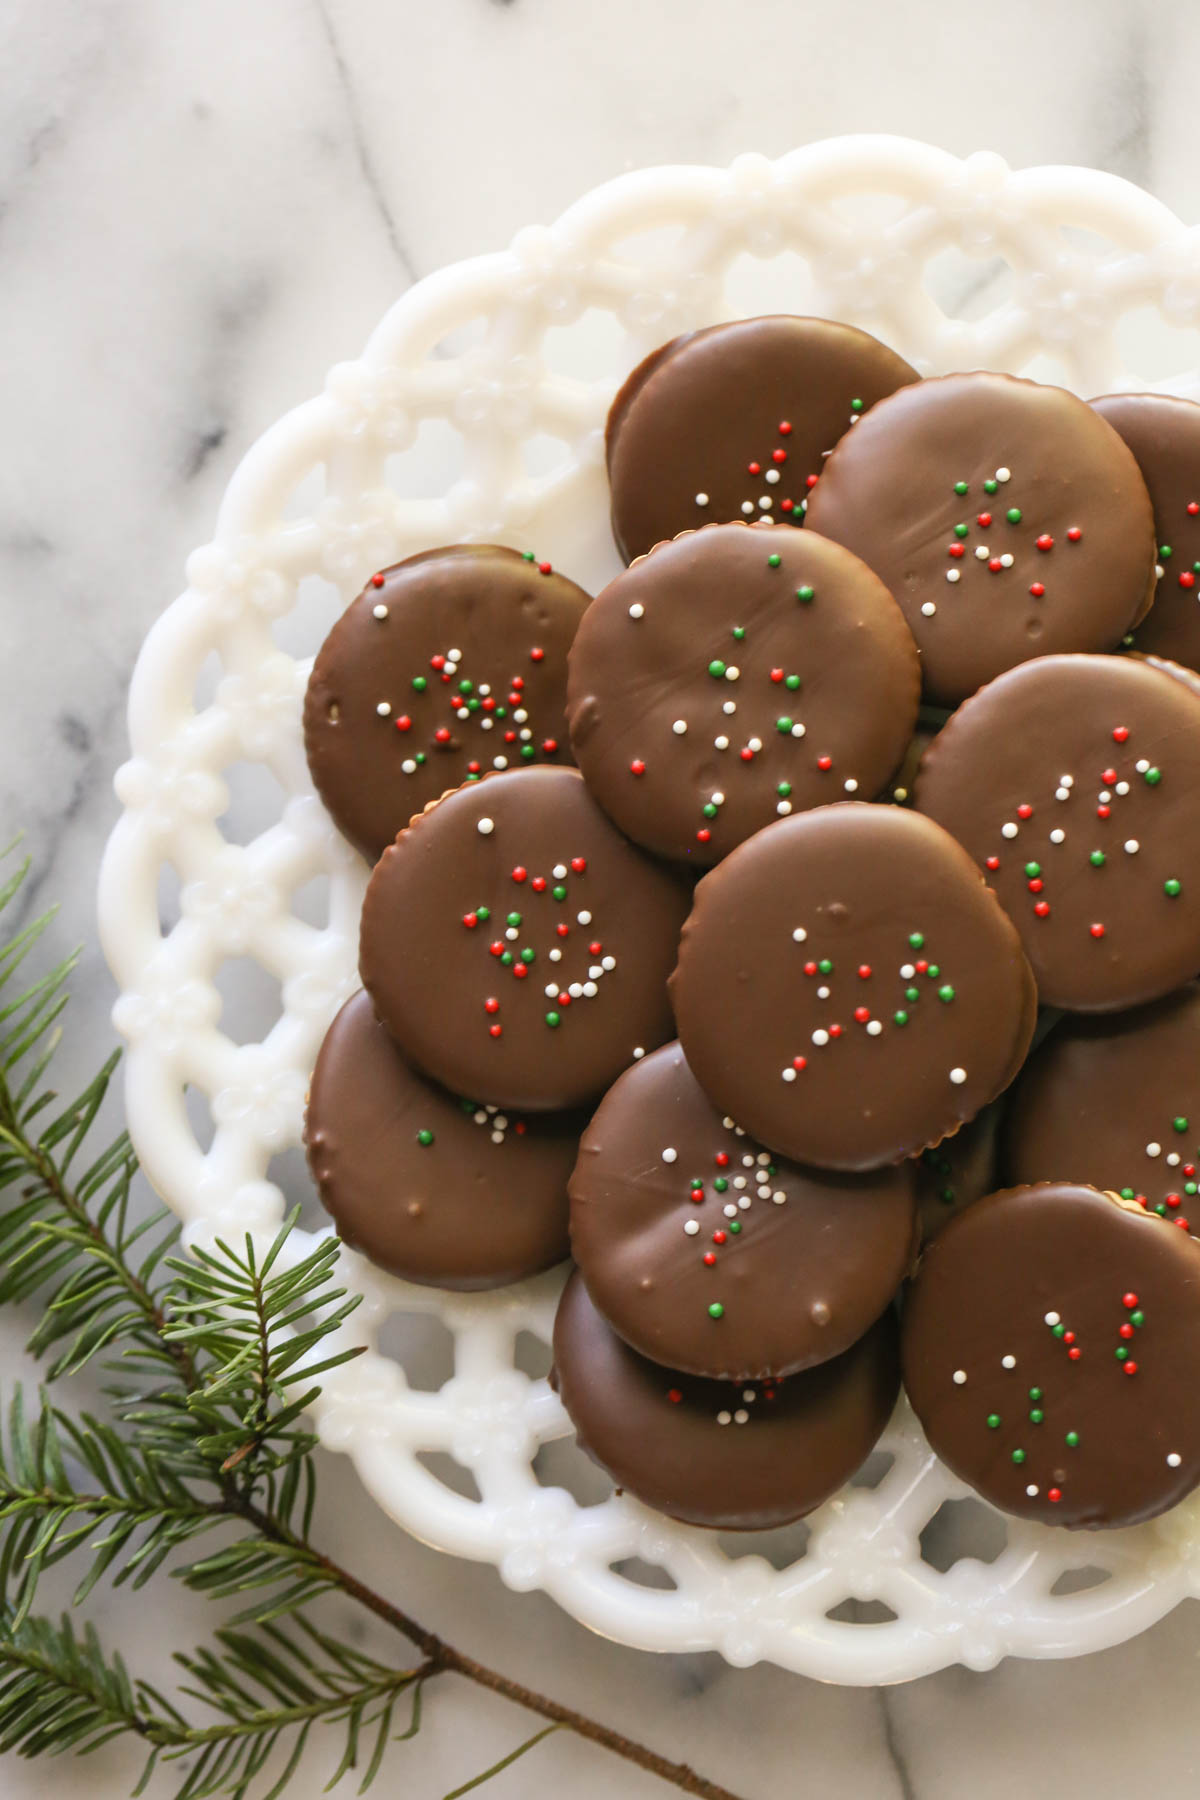 Overhead shot of Copycat Thin Mints arranged on a white decorative plate on a marble background with some pine greenery. 